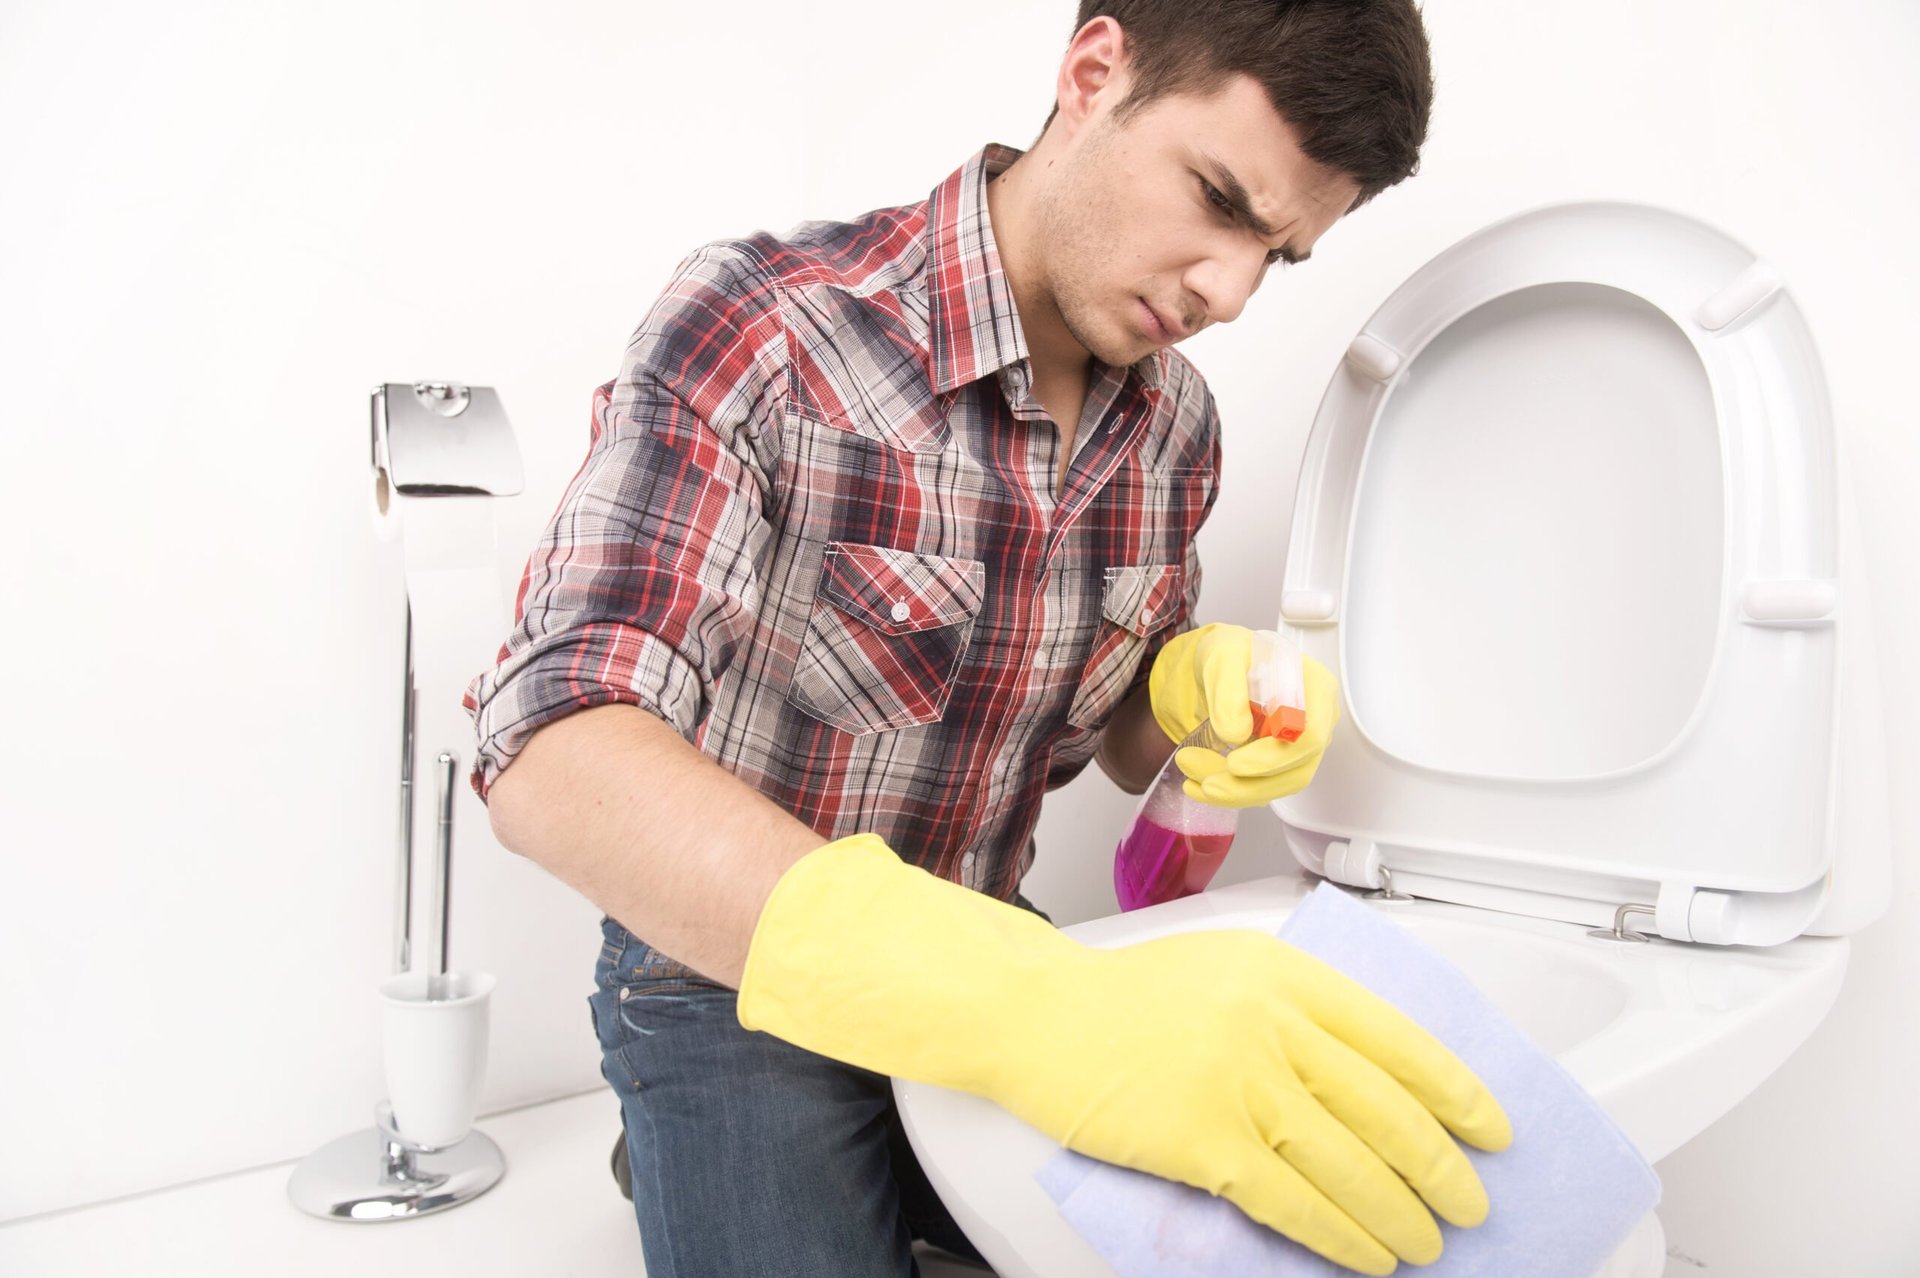 Man cleaning toilet.